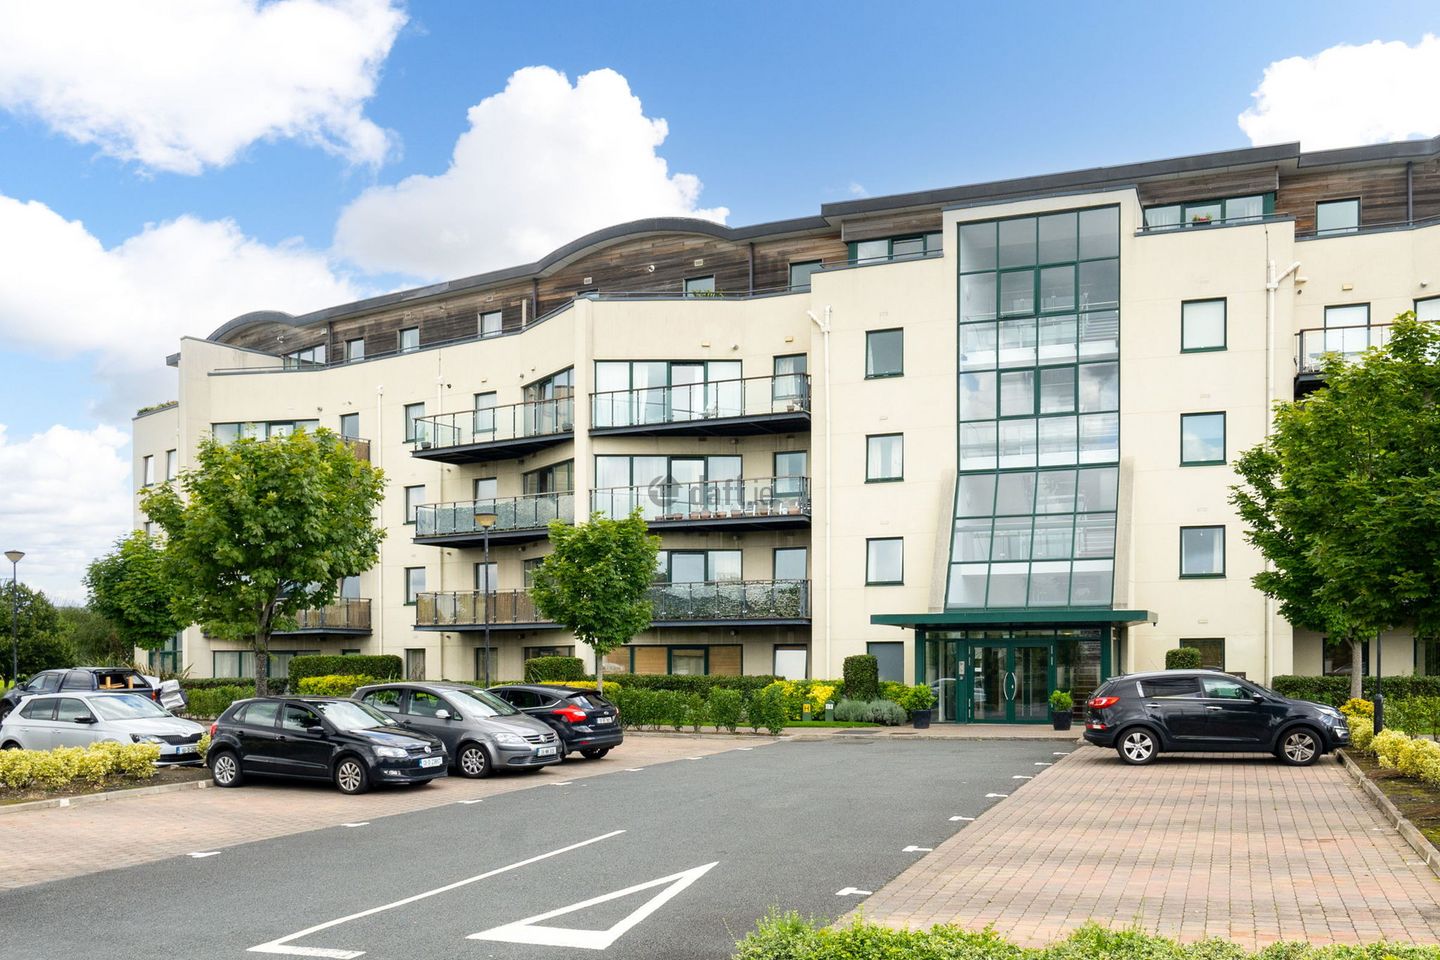 Apartment 138, The Anchorage, Seabourne View, Greystones, Co. Wicklow